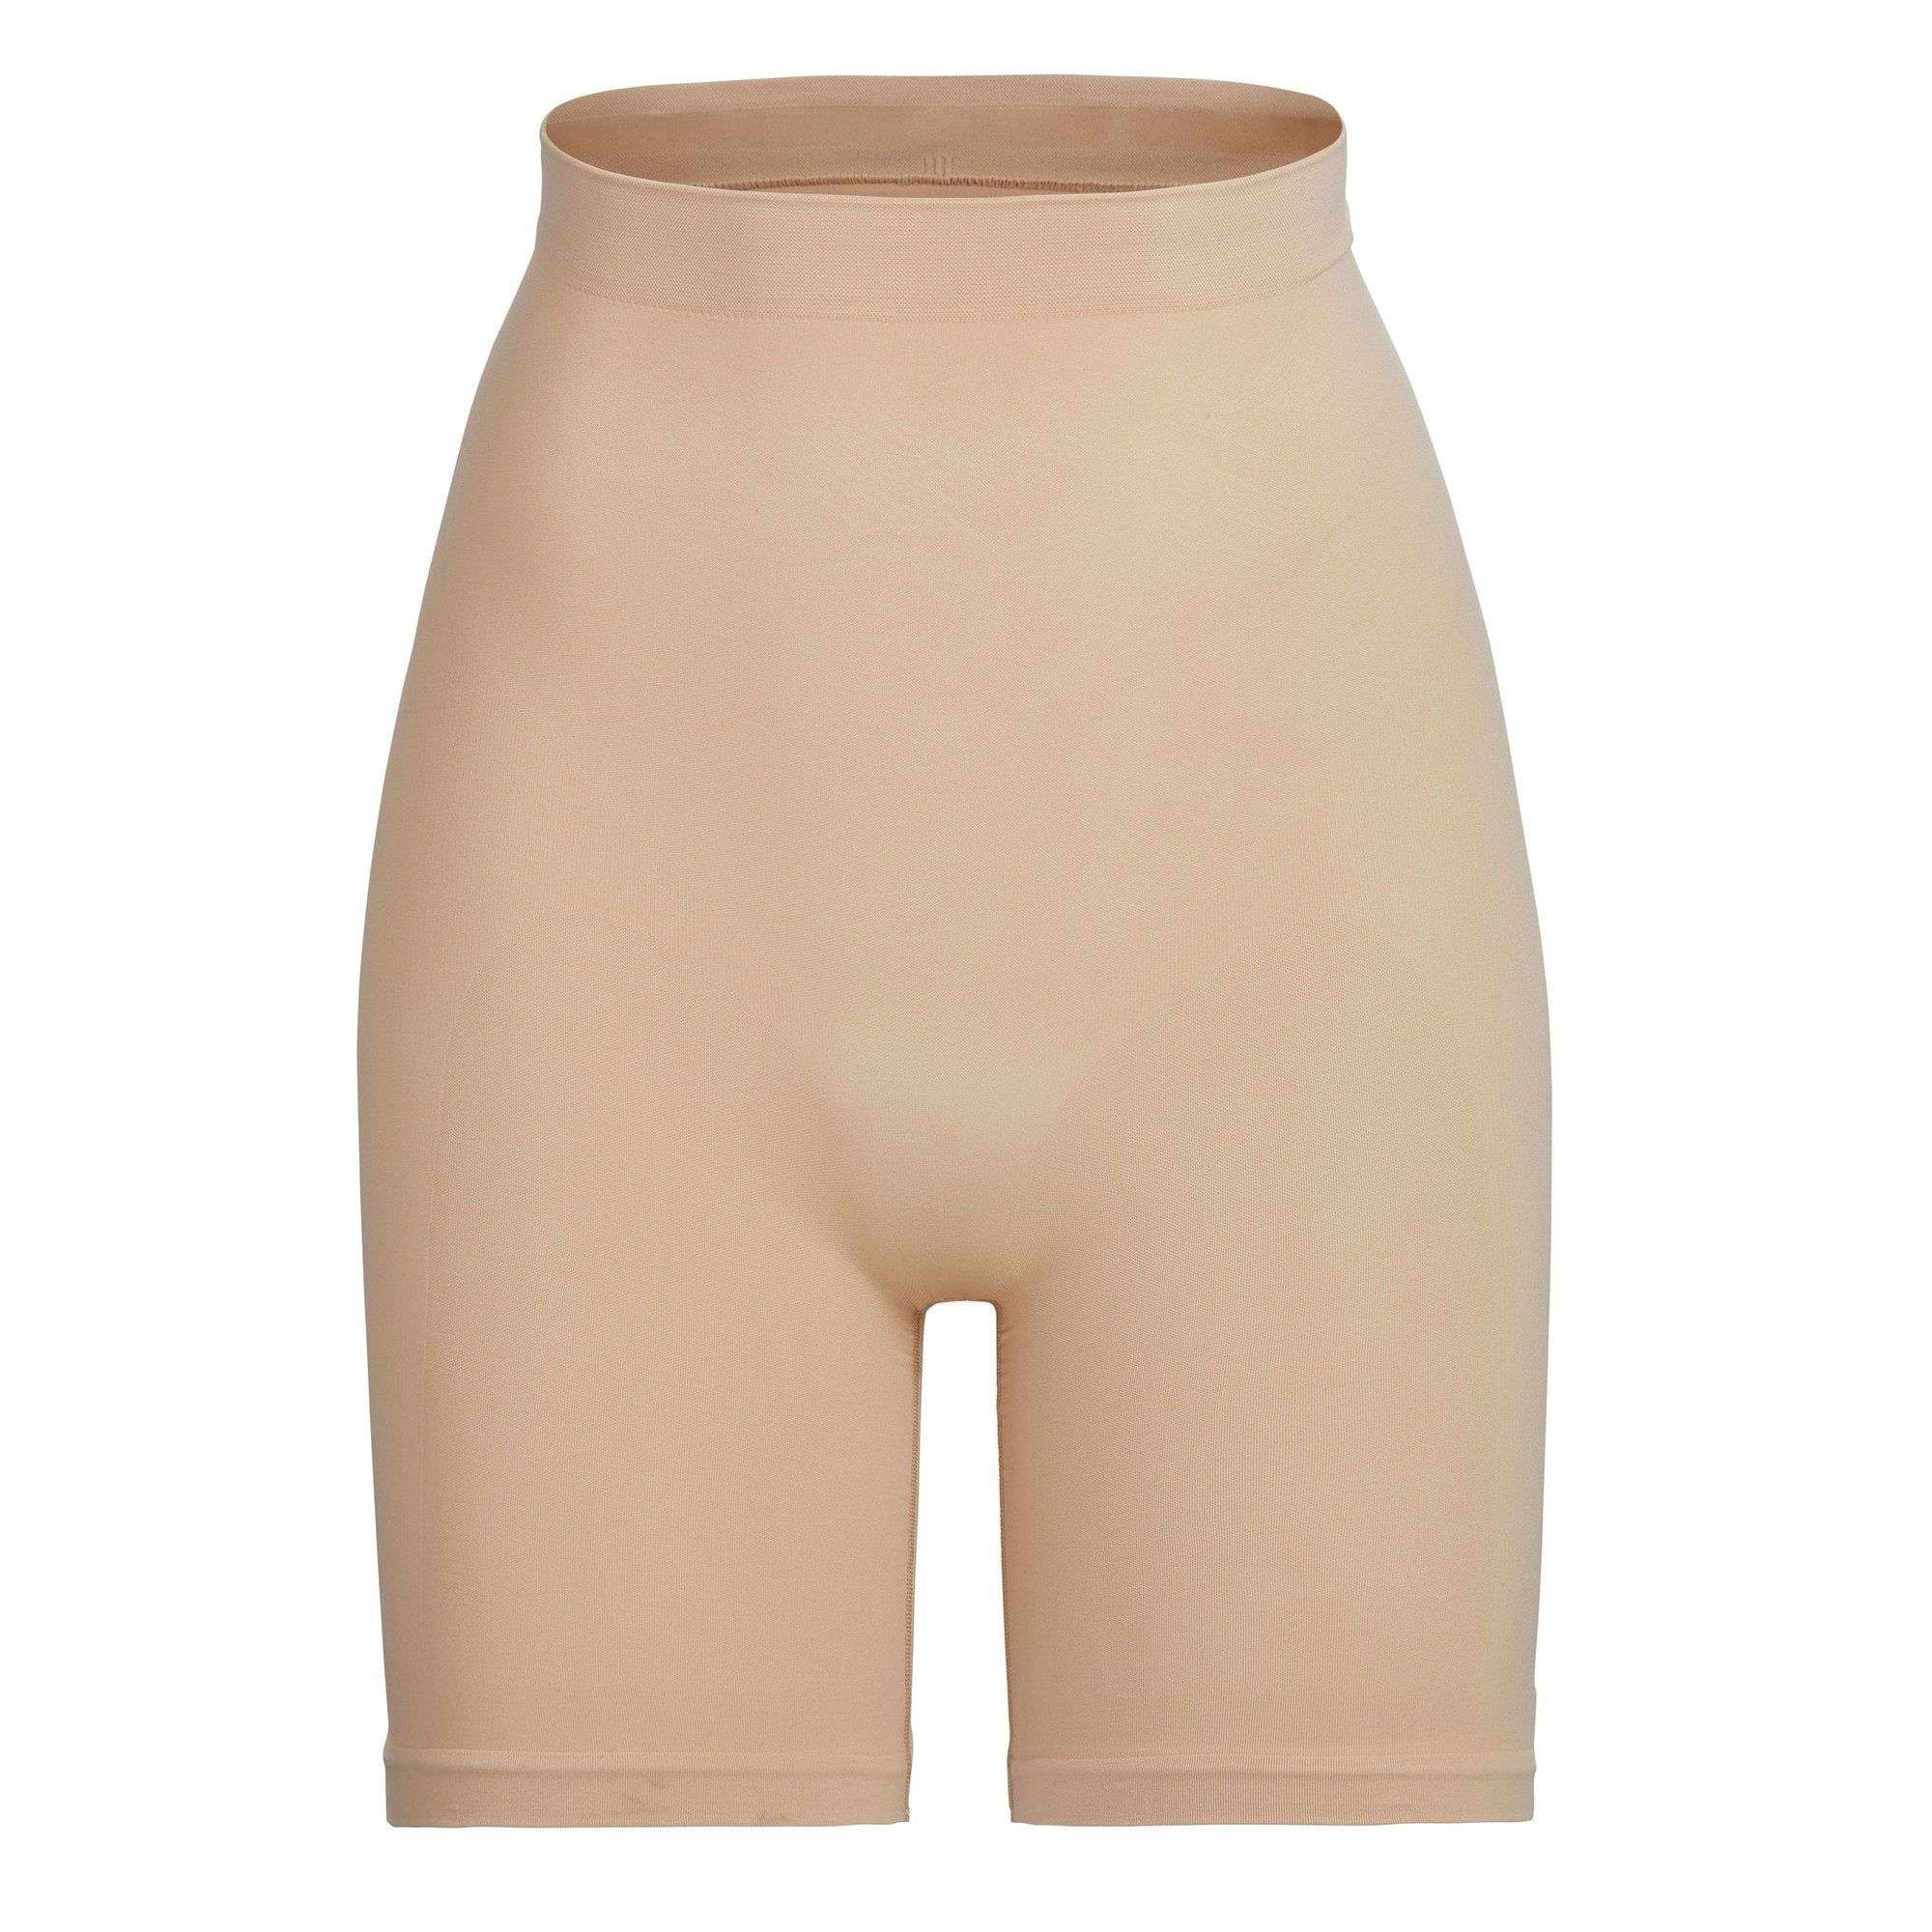 SCULPTING SHORT ABOVE THE KNEE W/ OPEN GUSSET | ONYX | SKIMS (US)